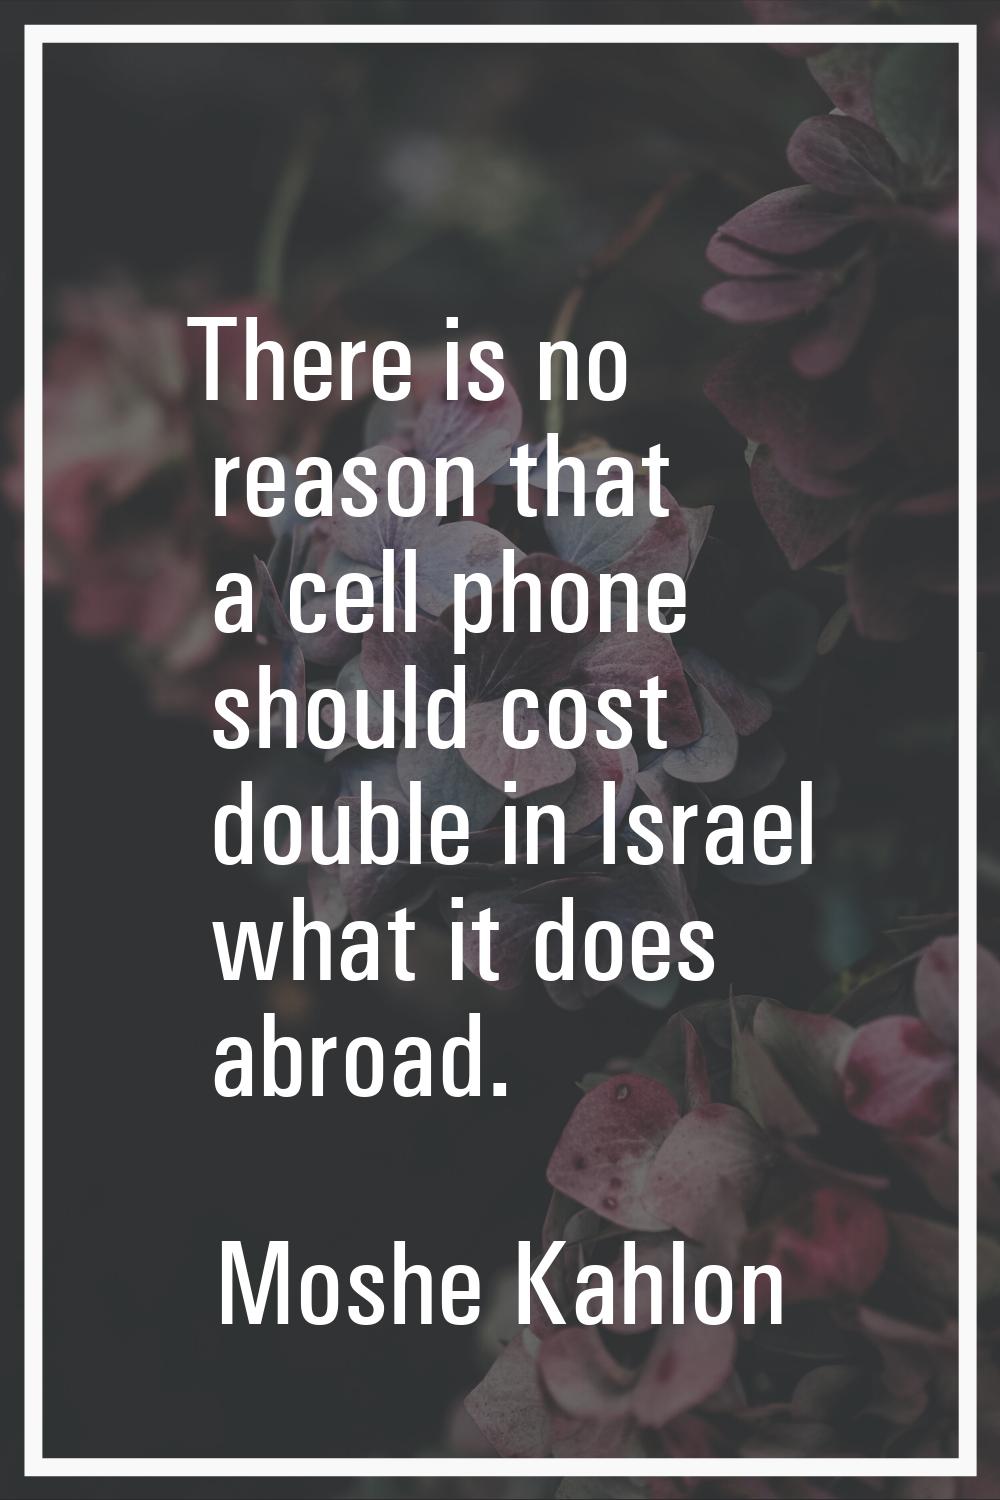 There is no reason that a cell phone should cost double in Israel what it does abroad.